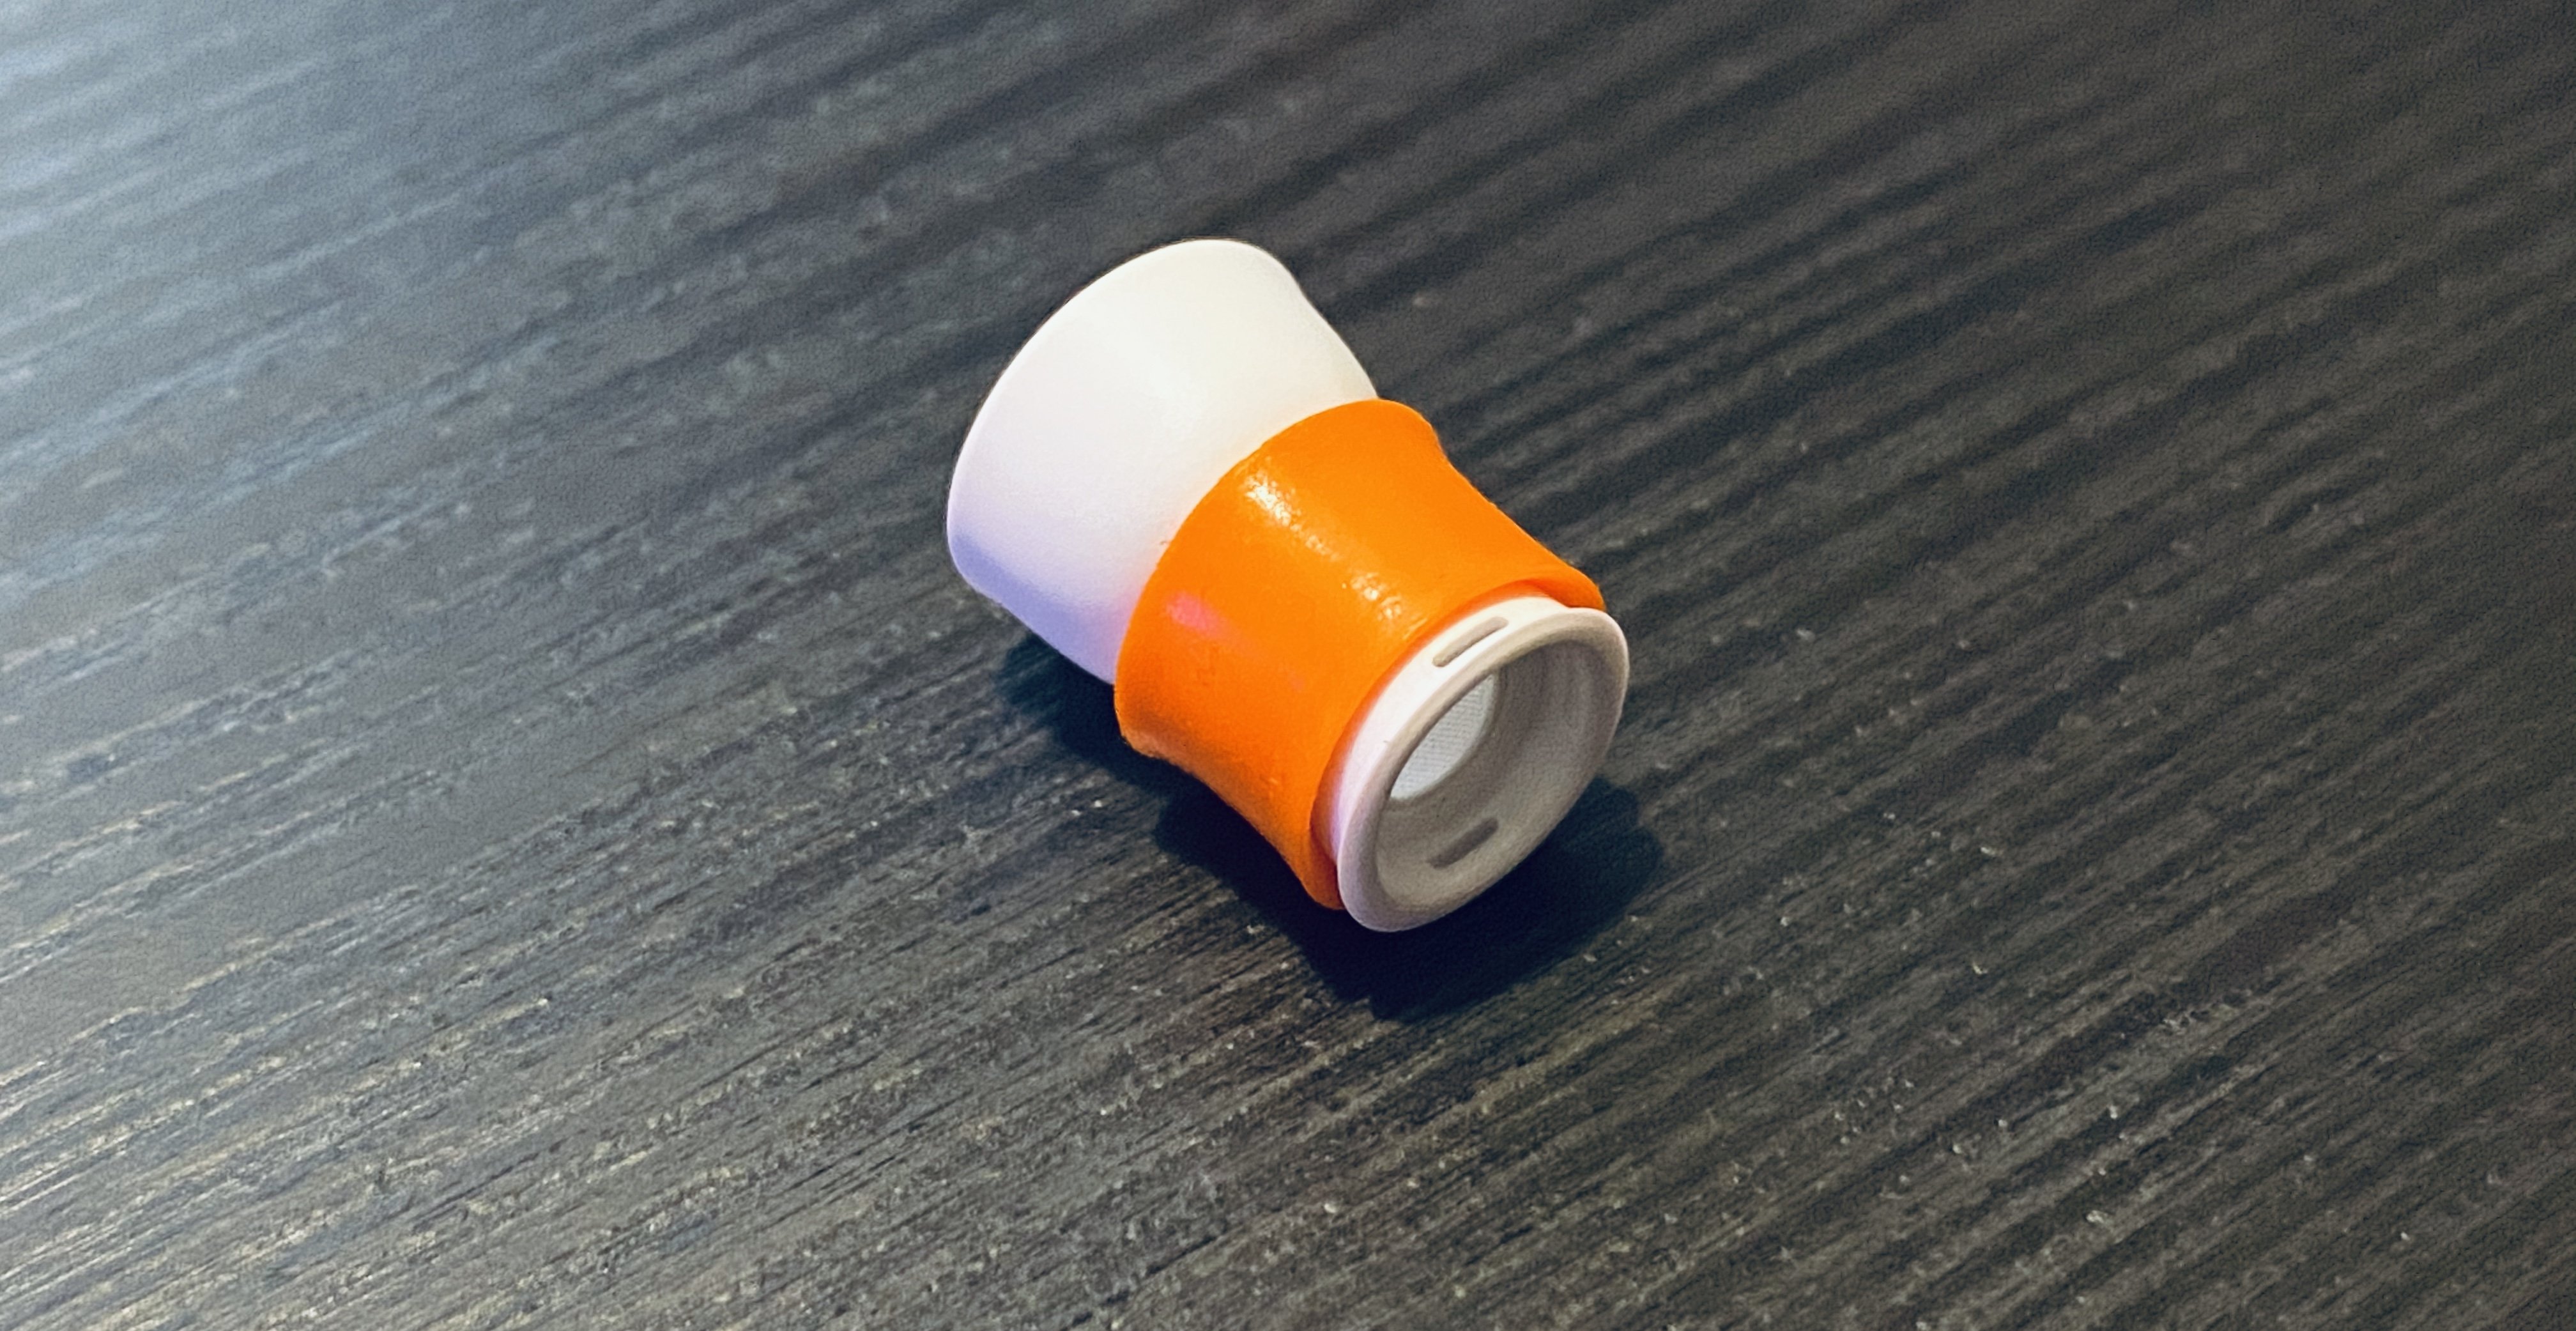 Fit the foam layer around the plastic stem of the AirPods Pro tip.